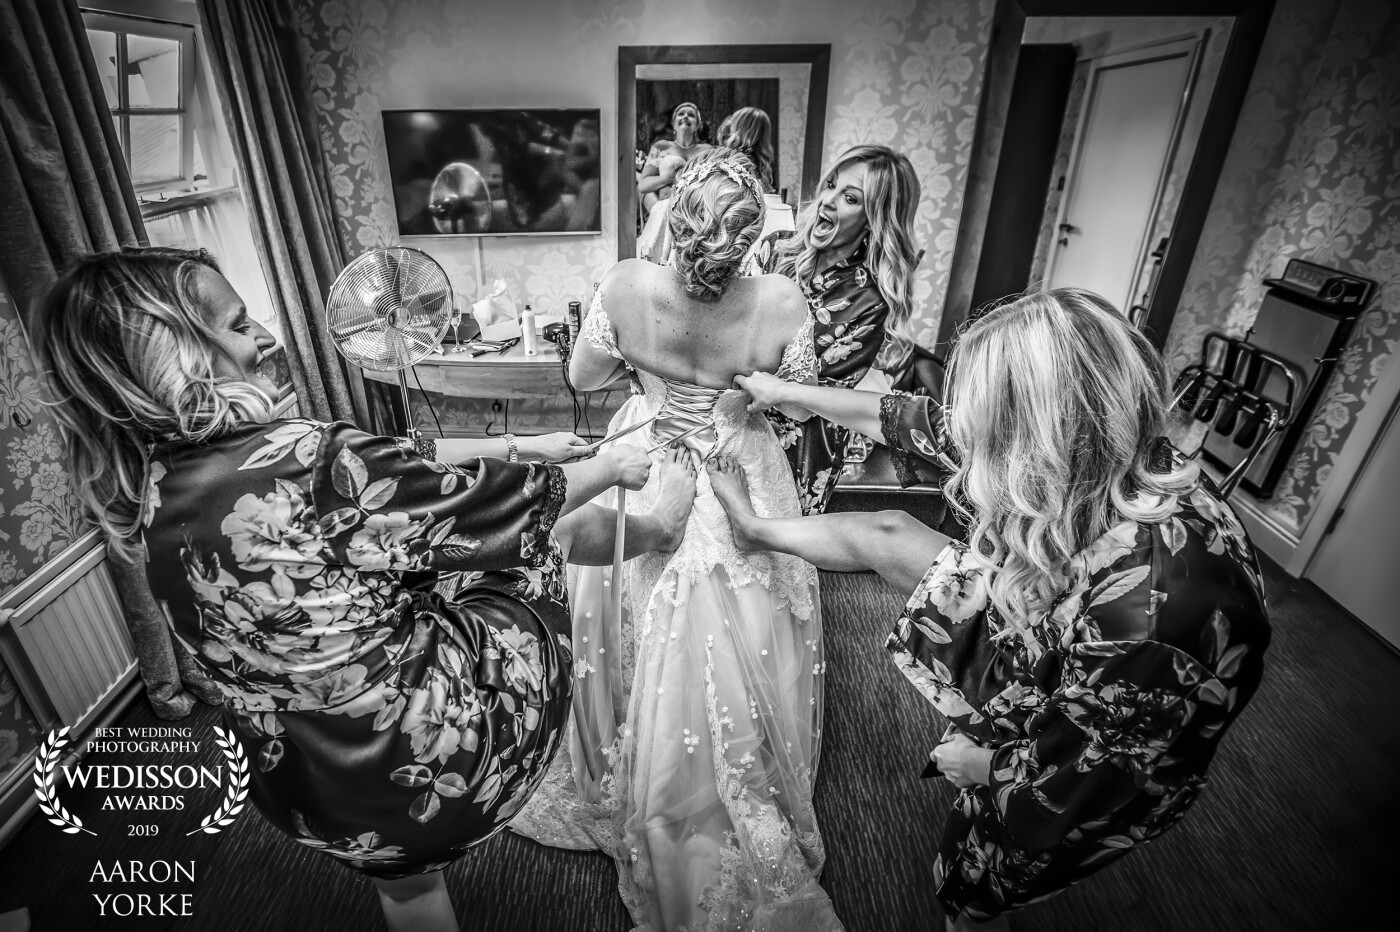 This image was taken at the Solihull Regency Hotel, Solihull UK. To get the shot I stood on the bed as the bridesmaids help the bride to put her dress on. I wanted to get a shot that showed the fun side to fit into a wedding dress, as the bride wanted to make sure she fitted into hers perfectly!! I angled the camera down from above to create the leaning back effect and set the lens to its widest (16mm) My camera gear was a Canon 5D, 16-35mm 2.8 lens ad f28, 1-100, on camera flash with a magmod bounce diffuser. 